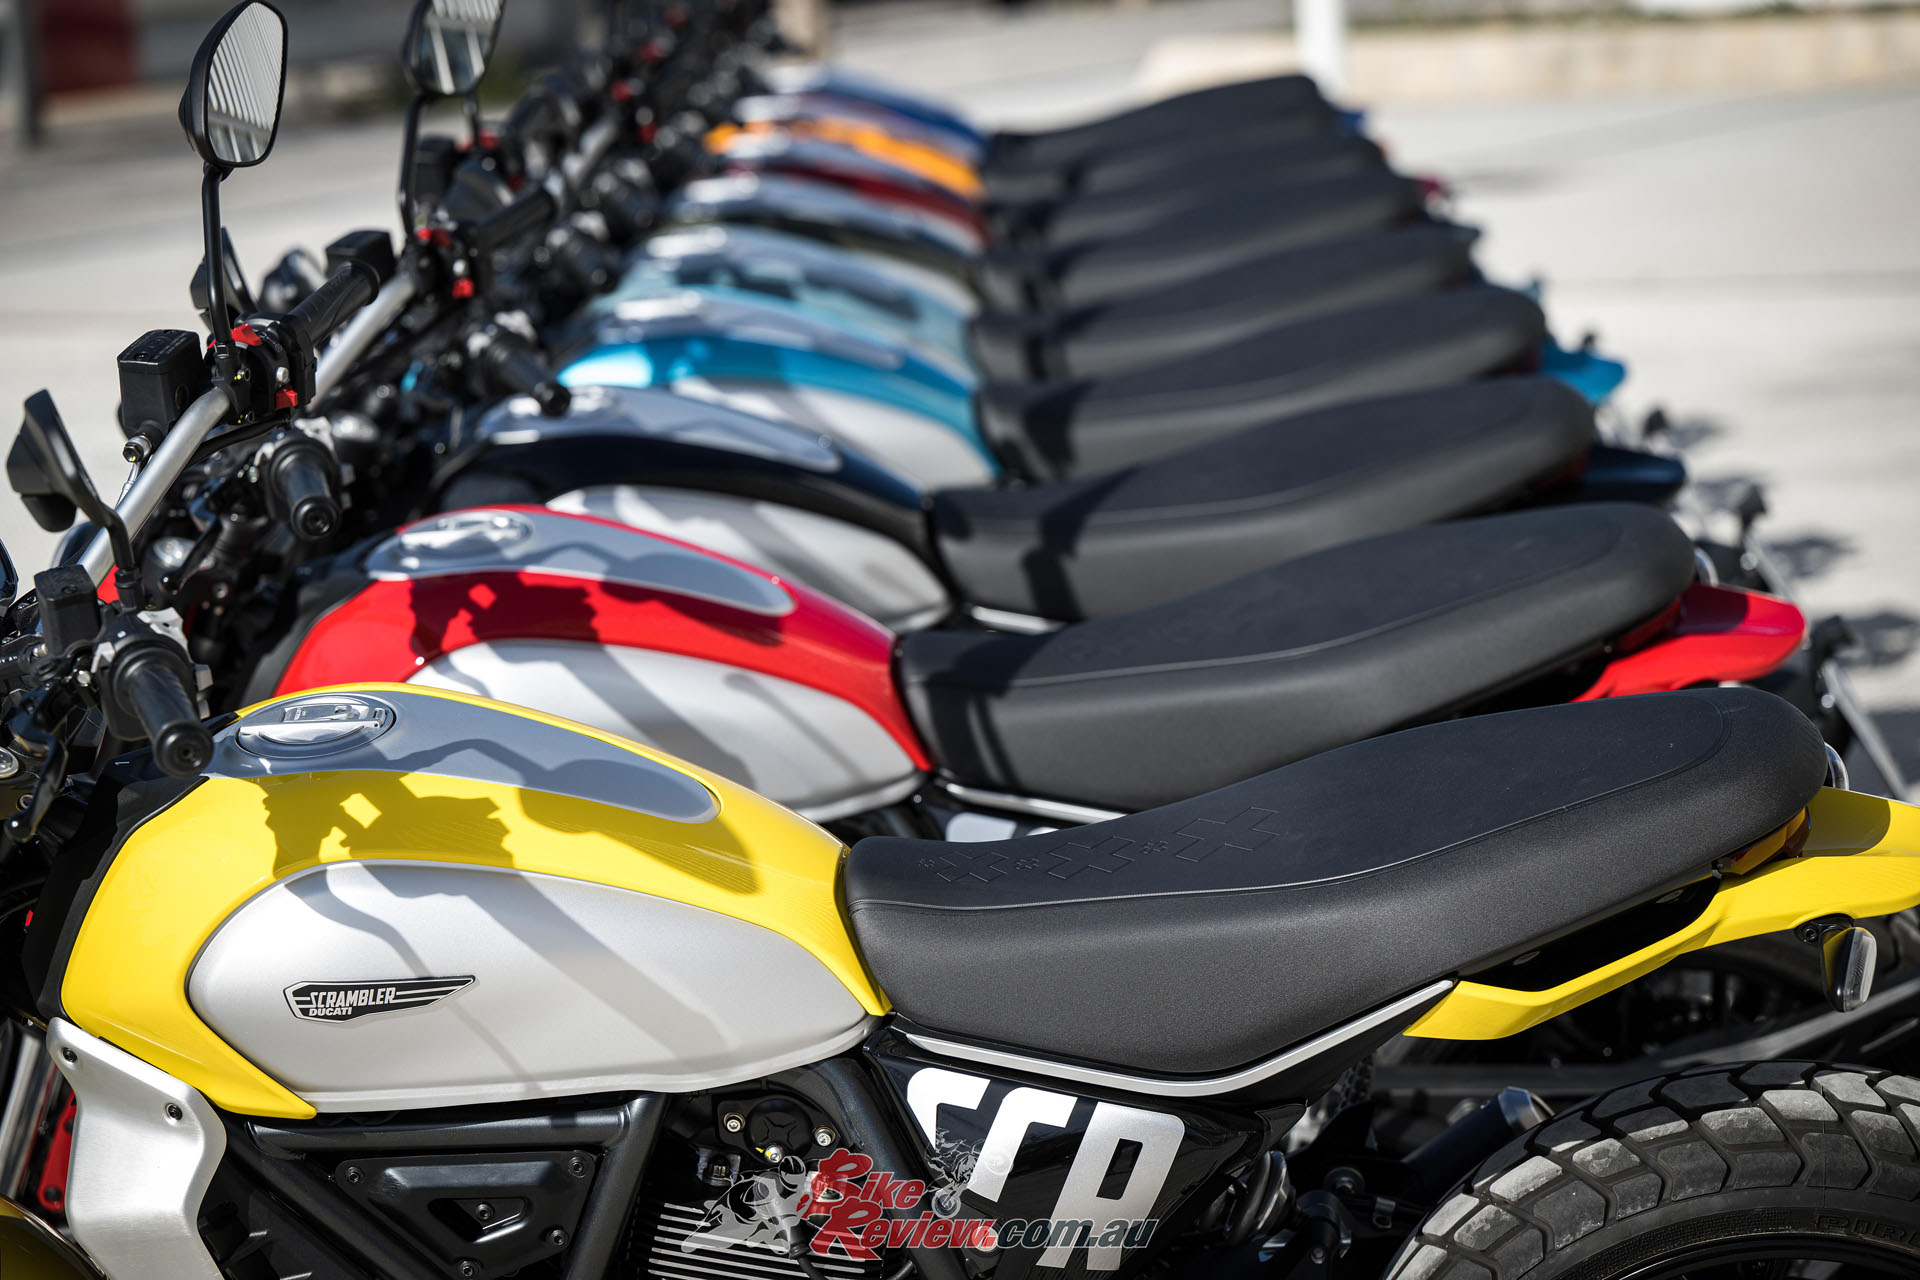 You can expect the Scramblers on the showroom floors from a rideaway price of $18,000 rideaway.